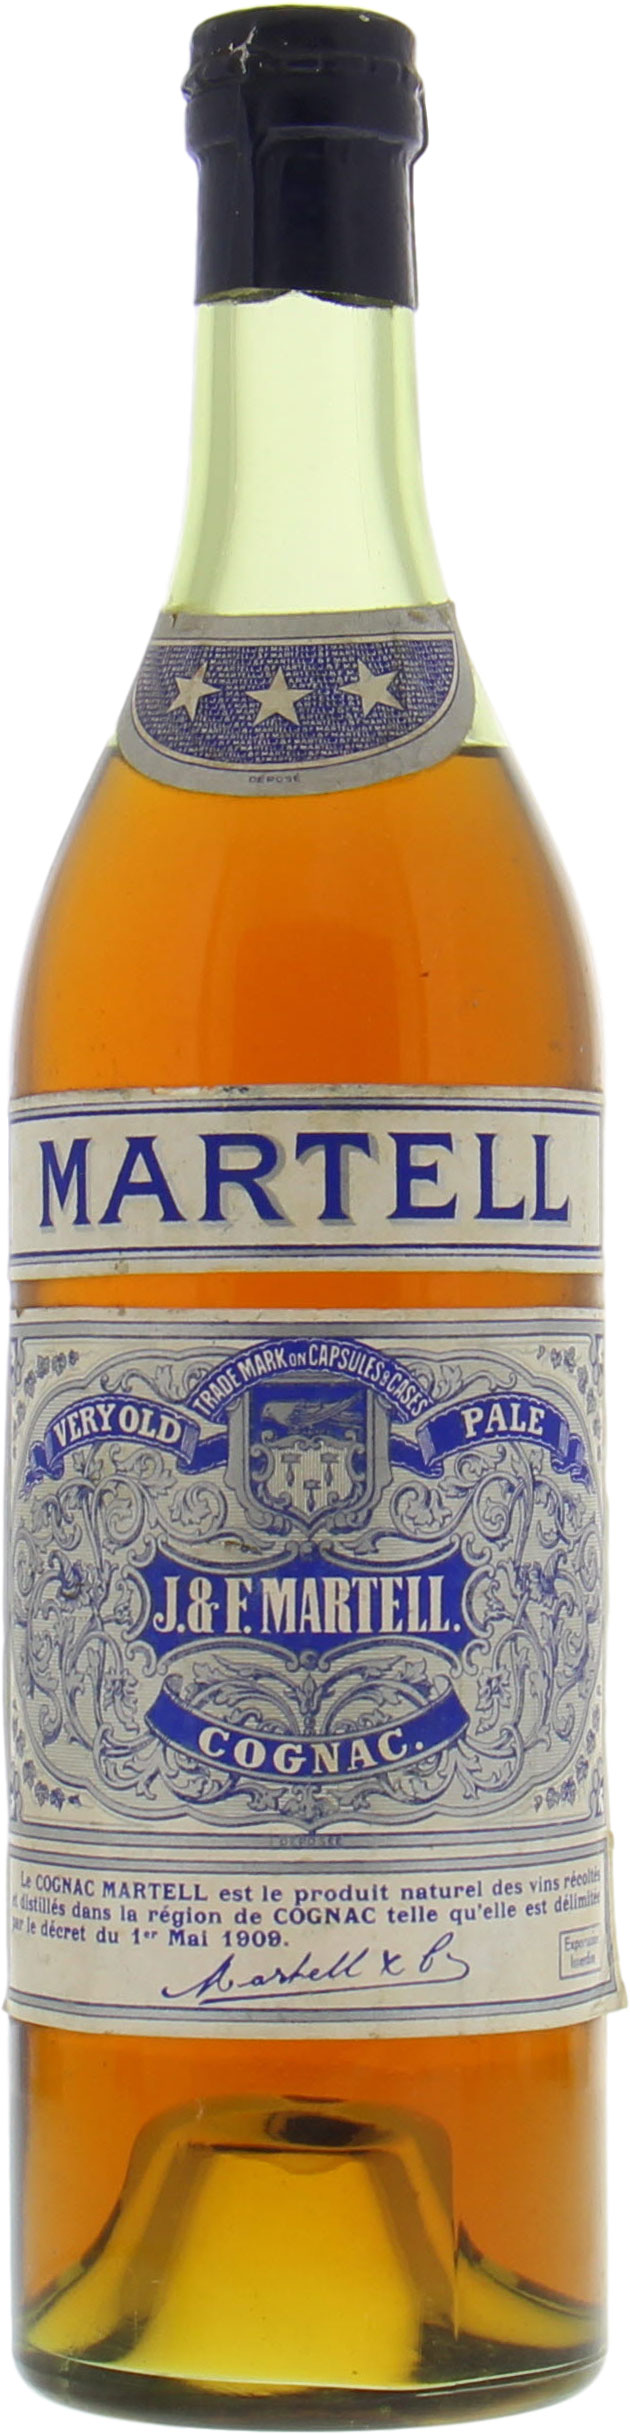 Martell - Very Old Pale (about 1960) NV